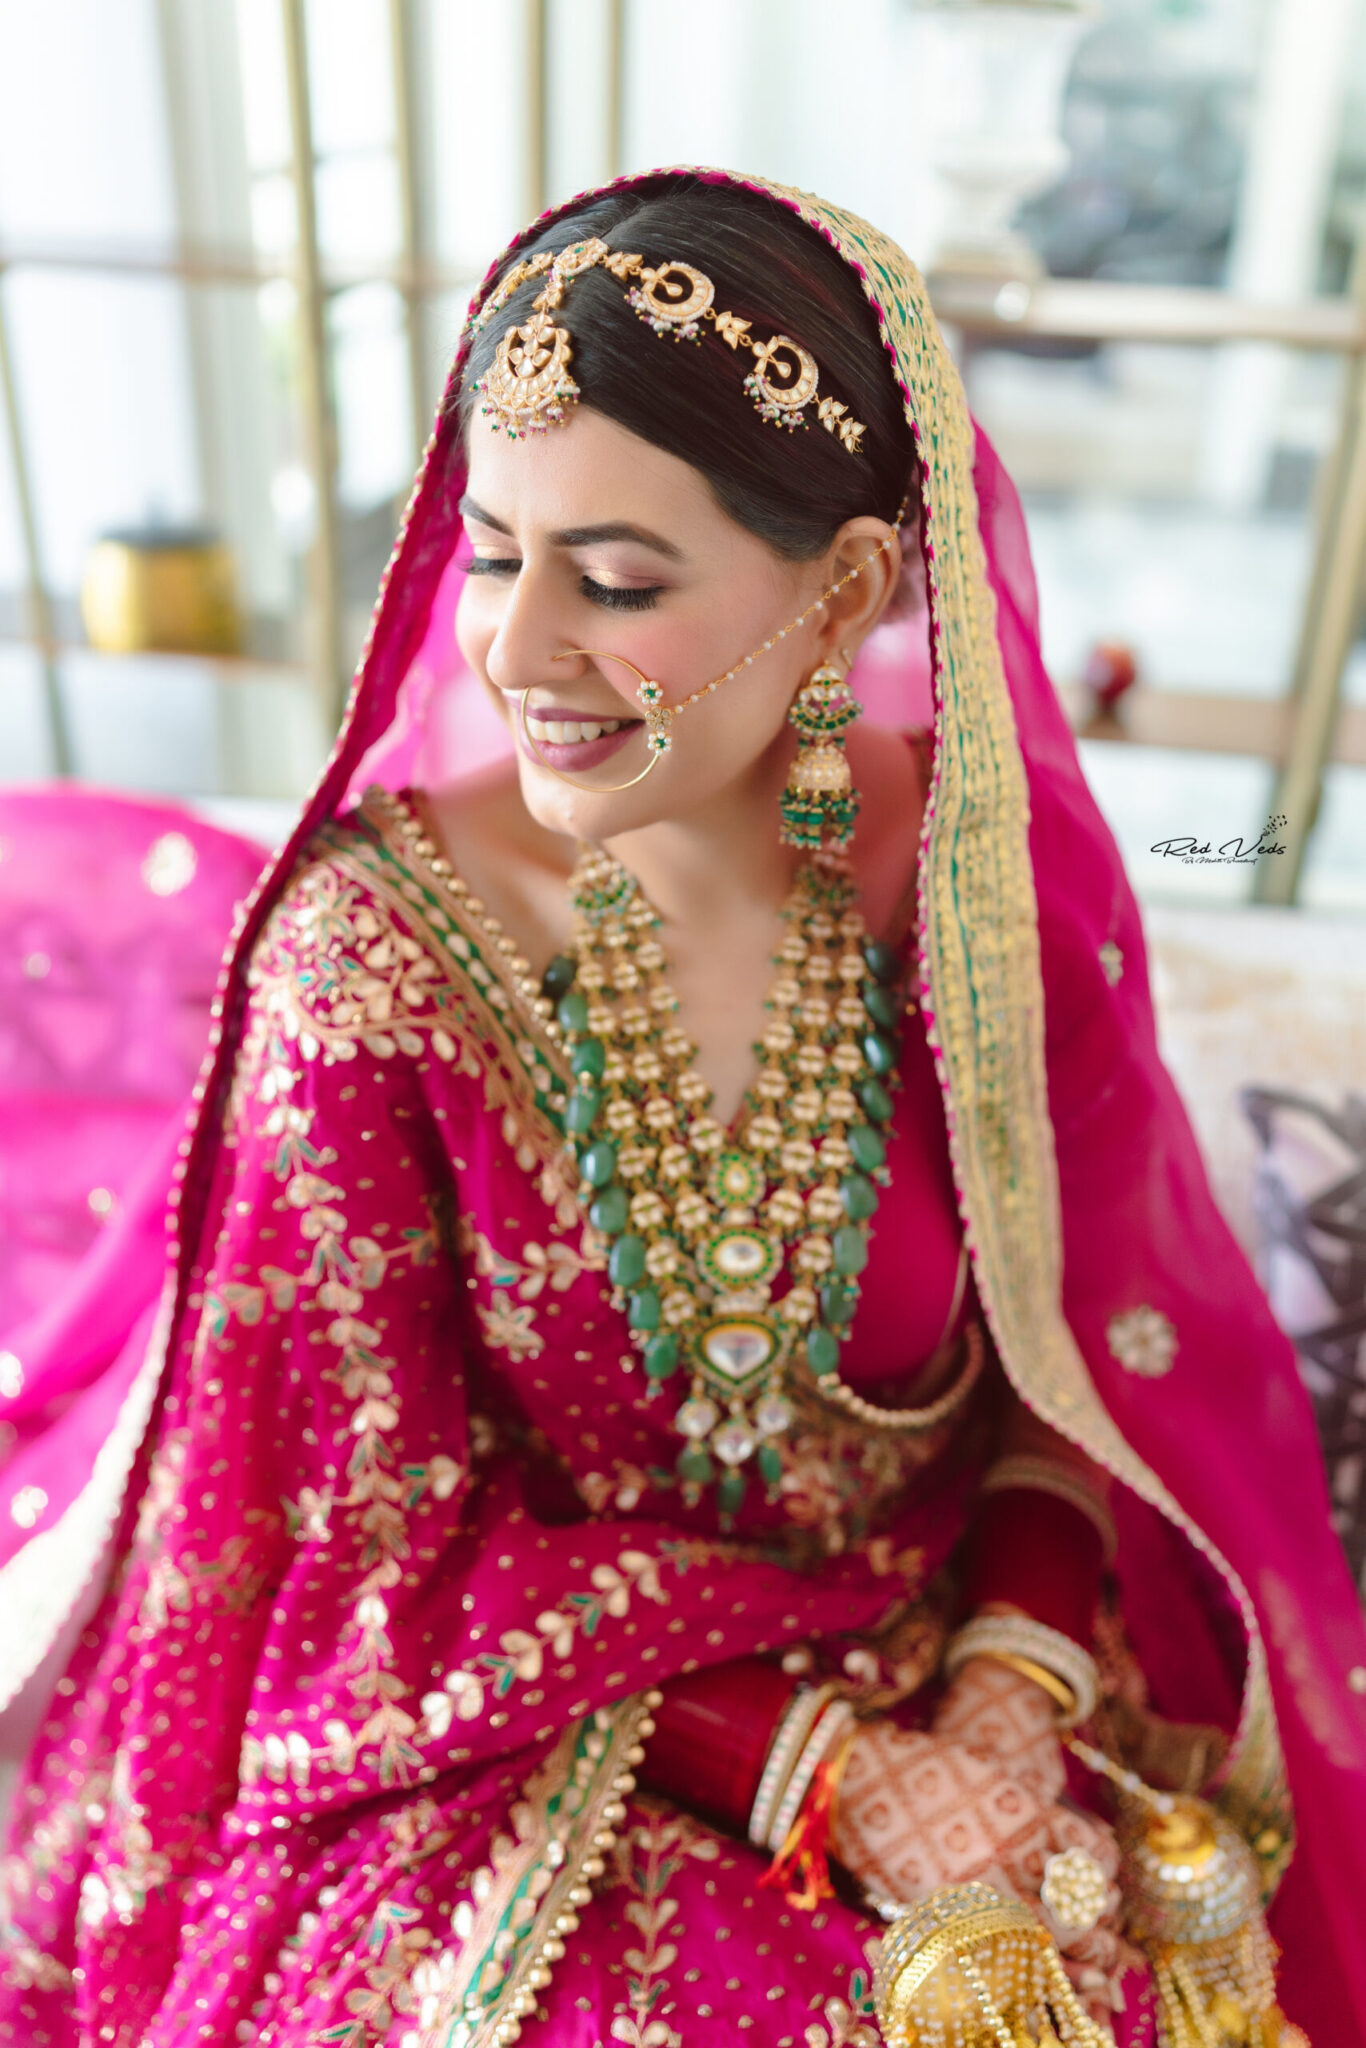 100+] Indian Bride Pictures | Wallpapers.com